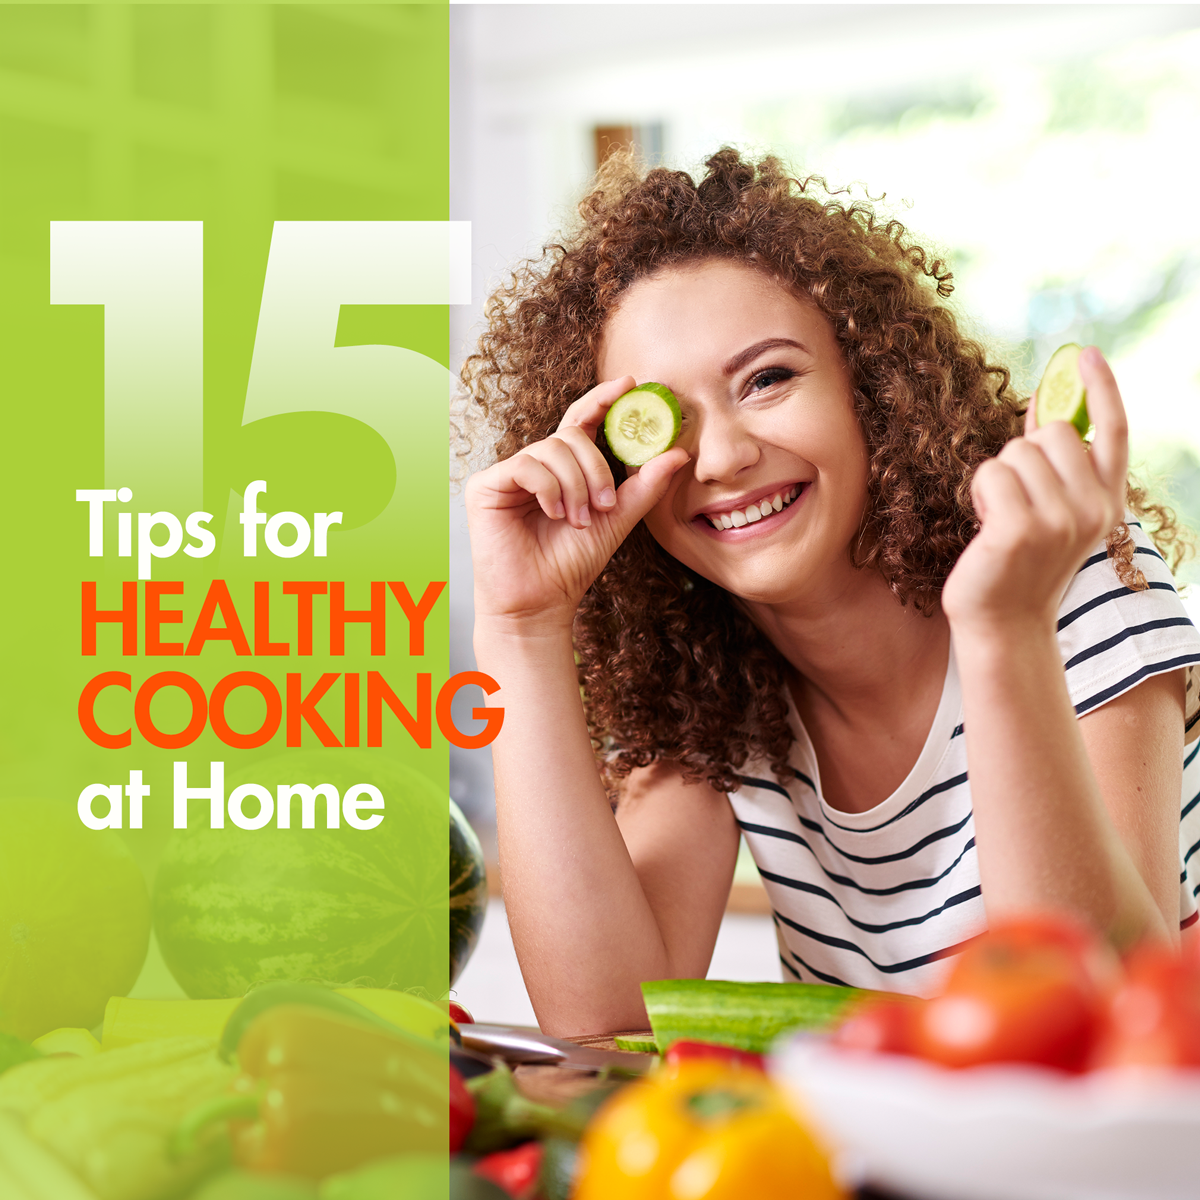 15 Tips for Healthy Cooking at Home, girl holding a cucumber slice over her eye